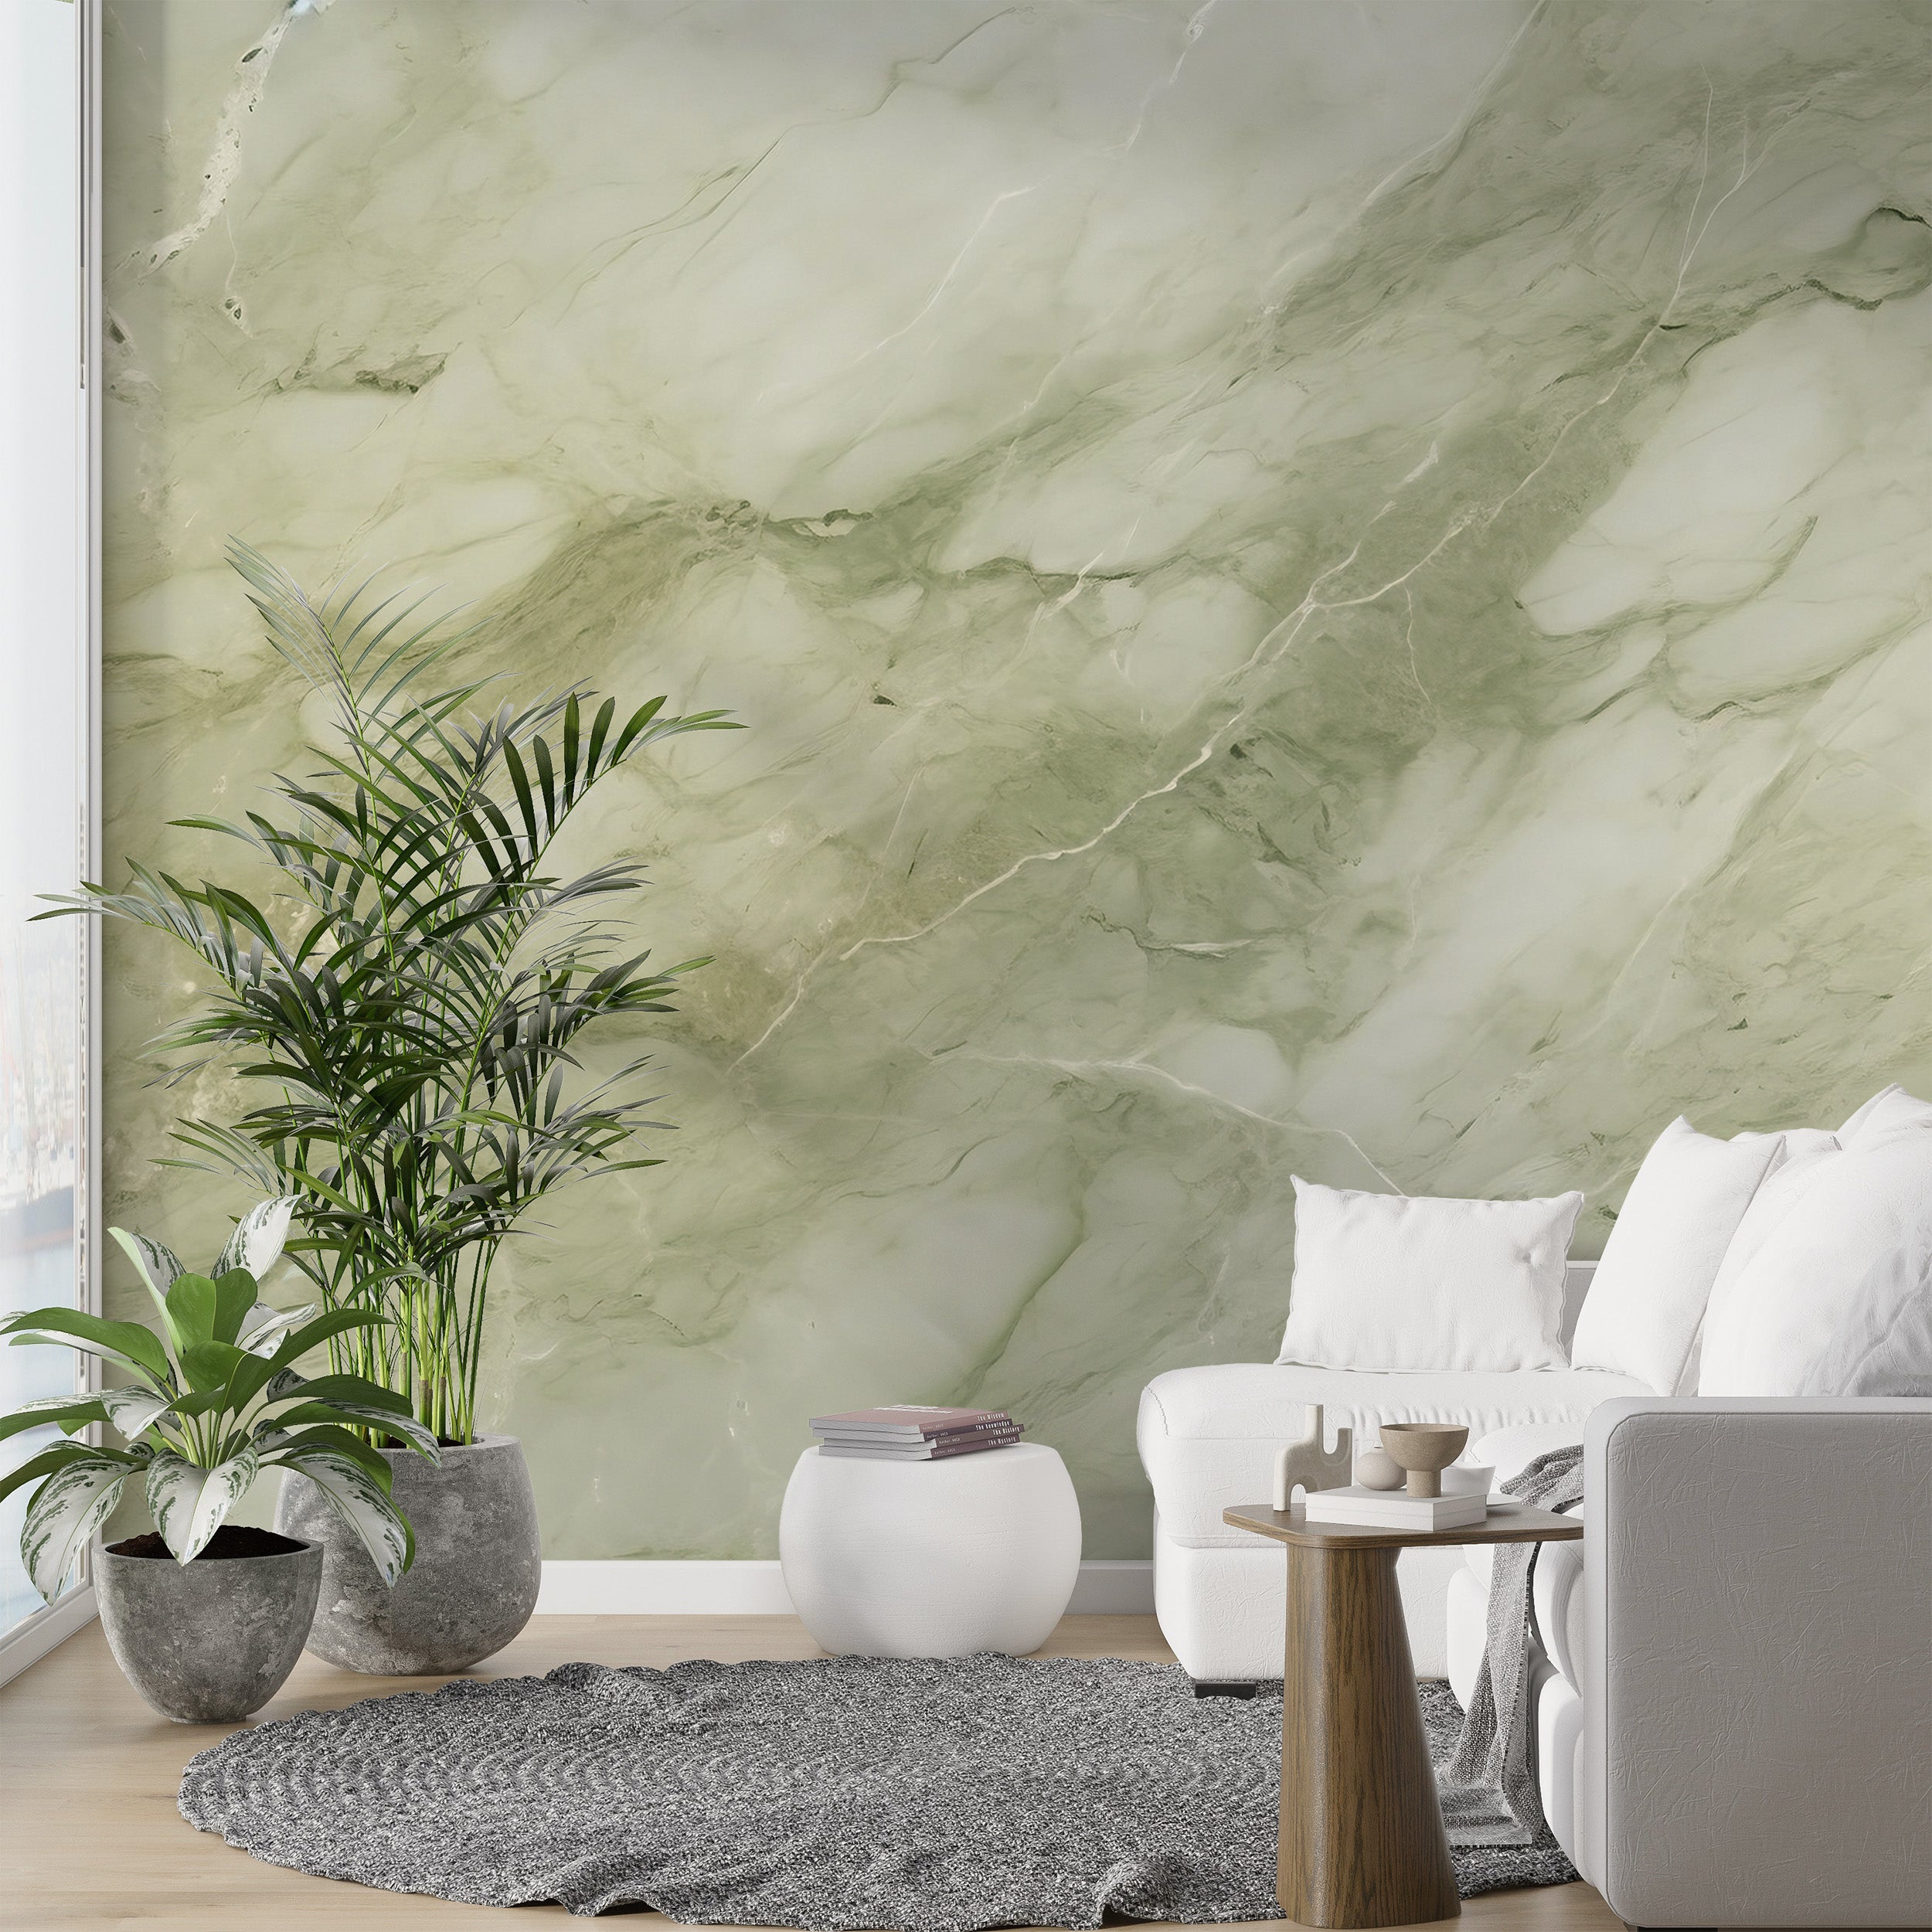 Redefine Ambiance with Green Marble Wall Covering